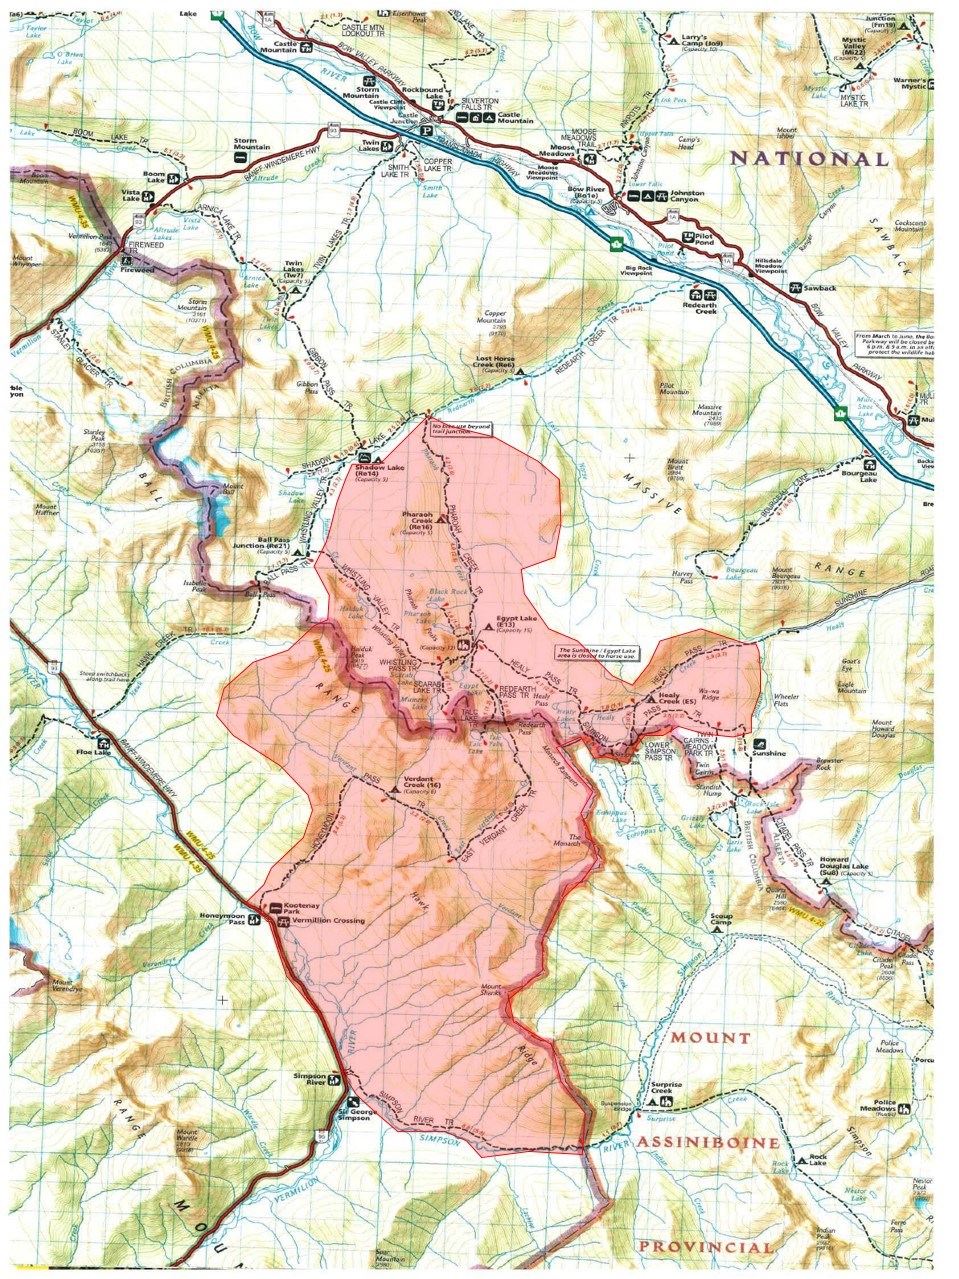 A map of the closure area in Kootenay and Banff national parks after a wildfire was reported near Verdant Creek on Saturday (July 15).